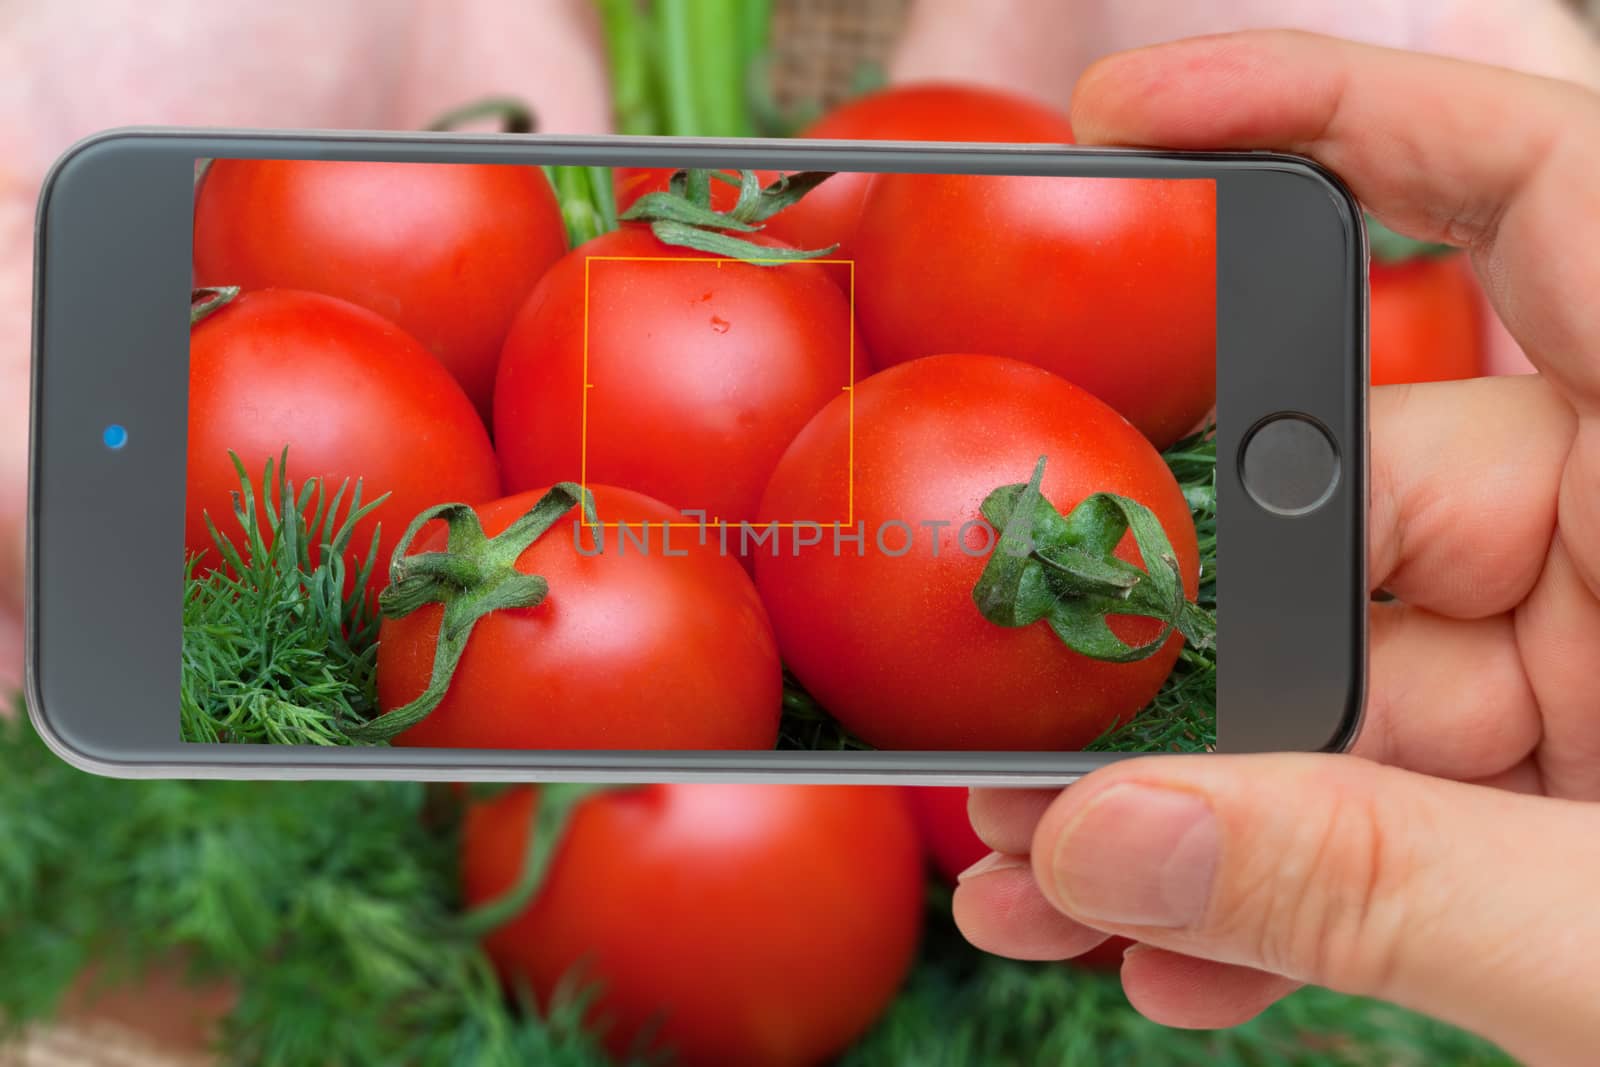 Fresh vegetables. Ingredients for cooking. Tomatoes in the smartphone screen.